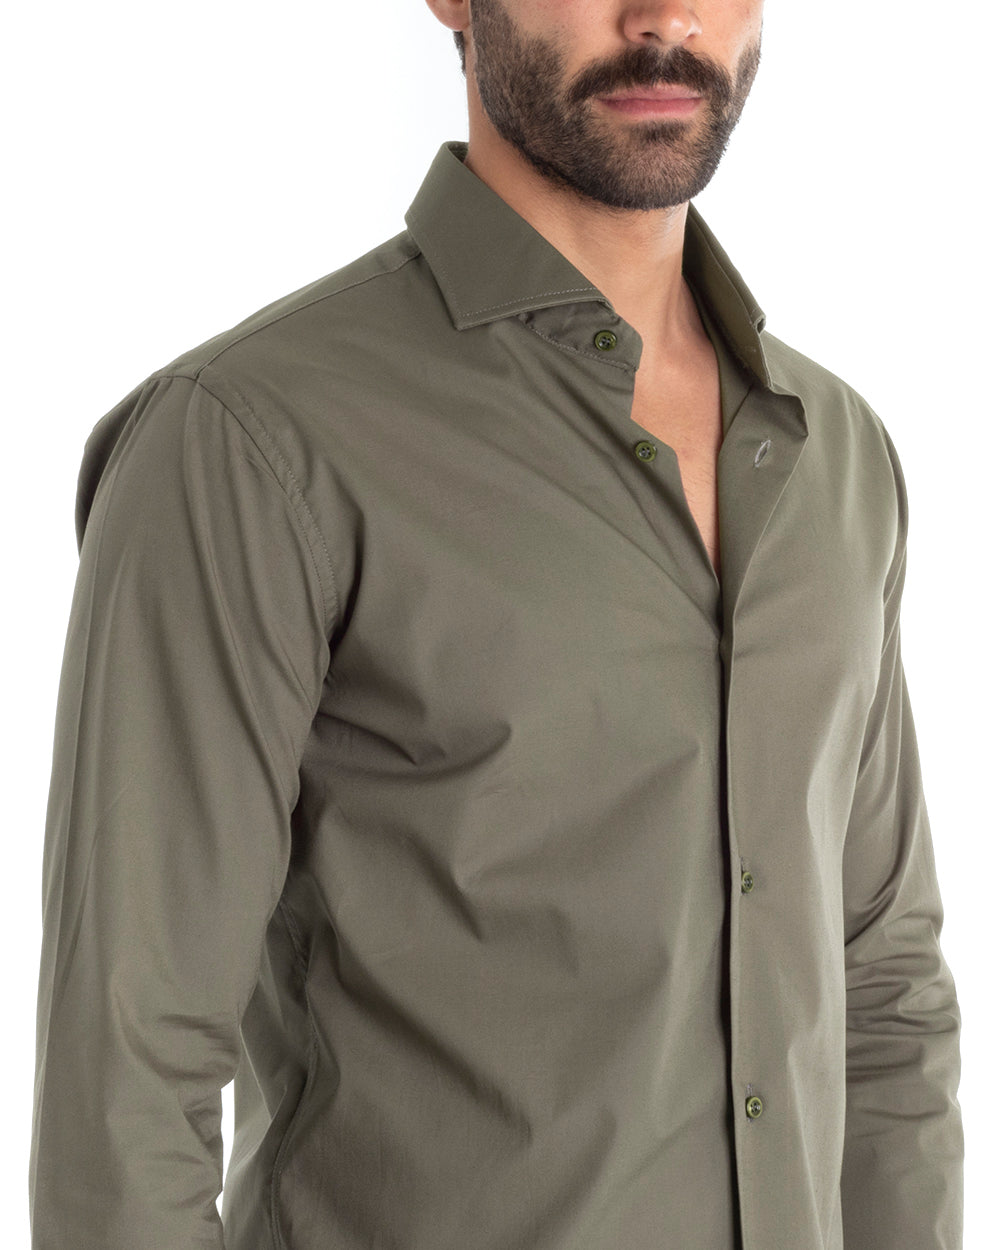 Men's Tailored Shirt With Collar Long Sleeve Basic Soft Cotton Military Green Regular Fit GIOSAL-C2401A